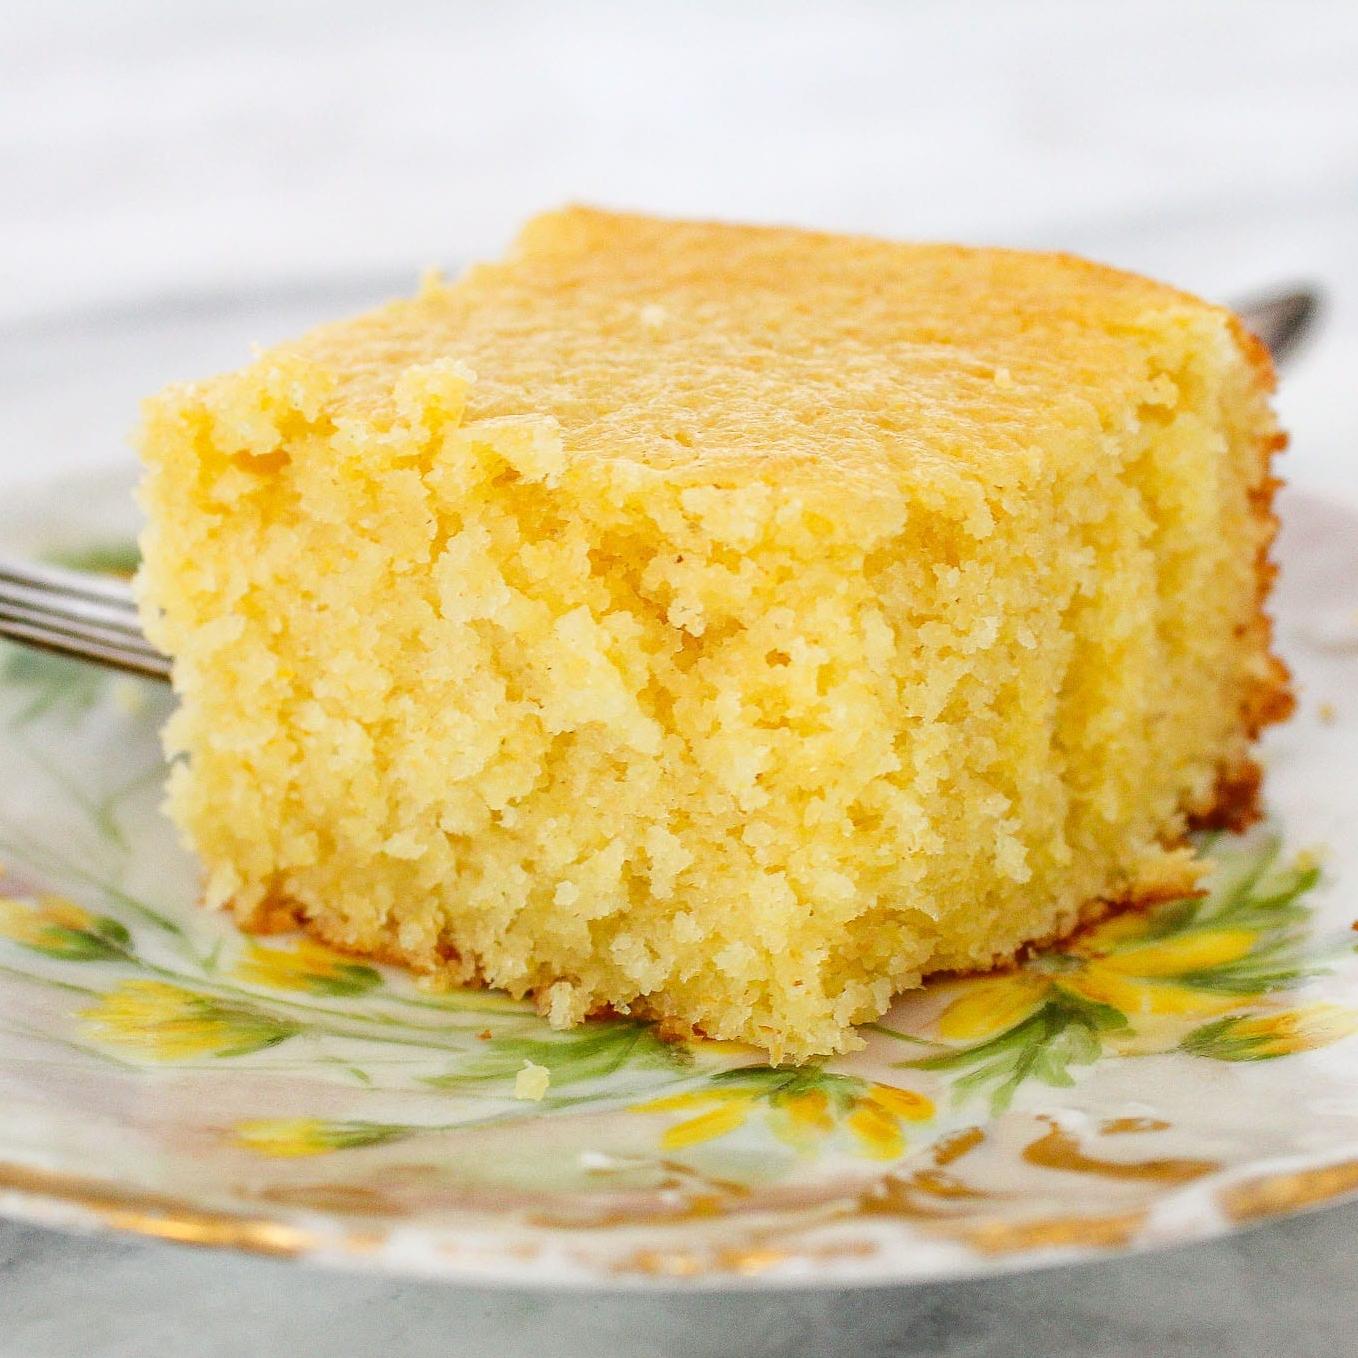  A childhood classic made to perfection: grandma's southern cornbread recipe